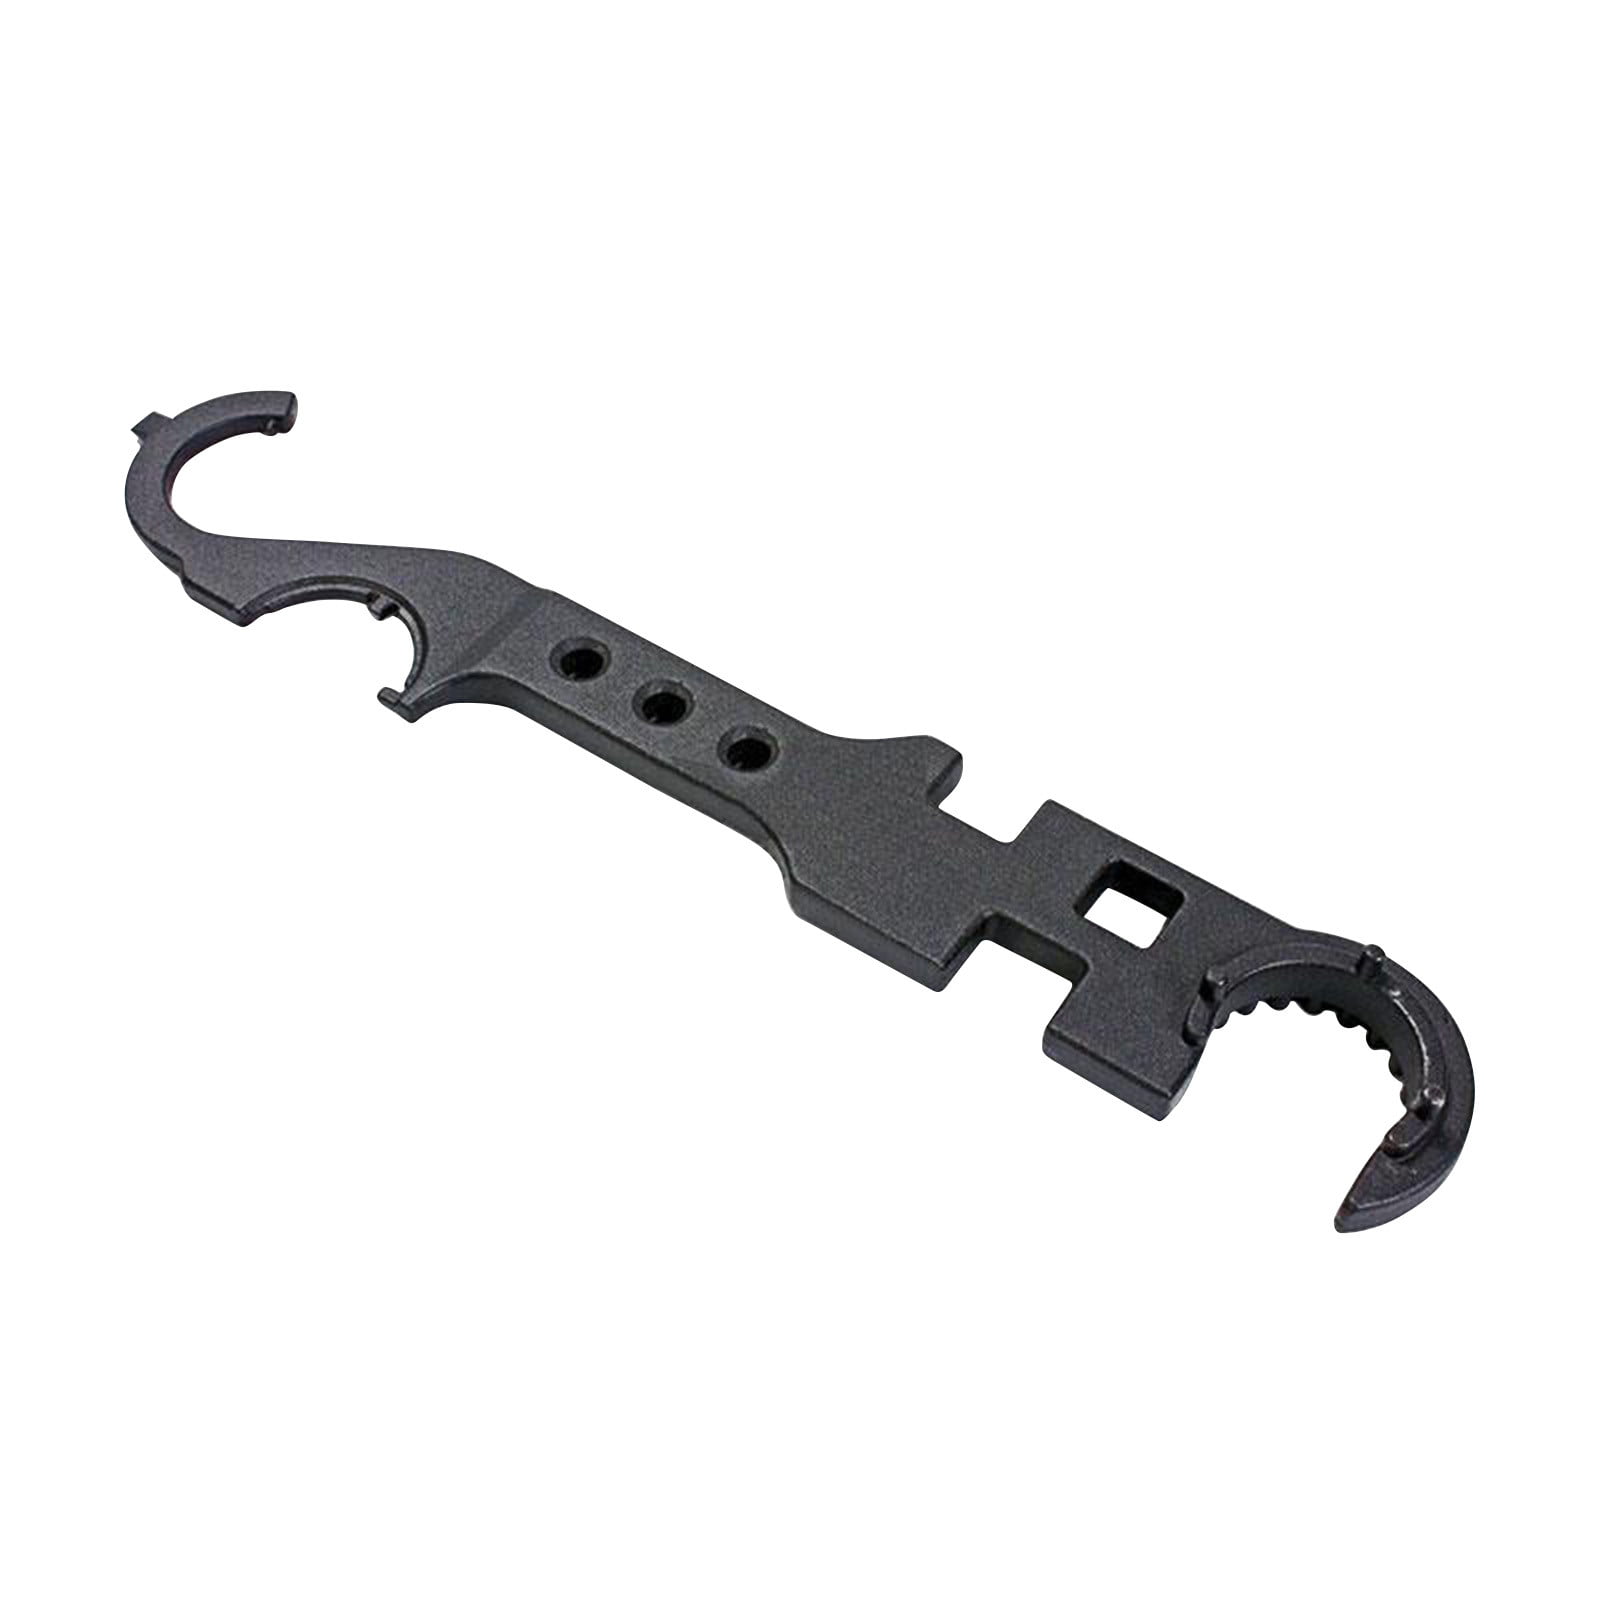 Camping Wrench Accurate Handling And Use Sturdy And Wear Resistant Metal Wrench 